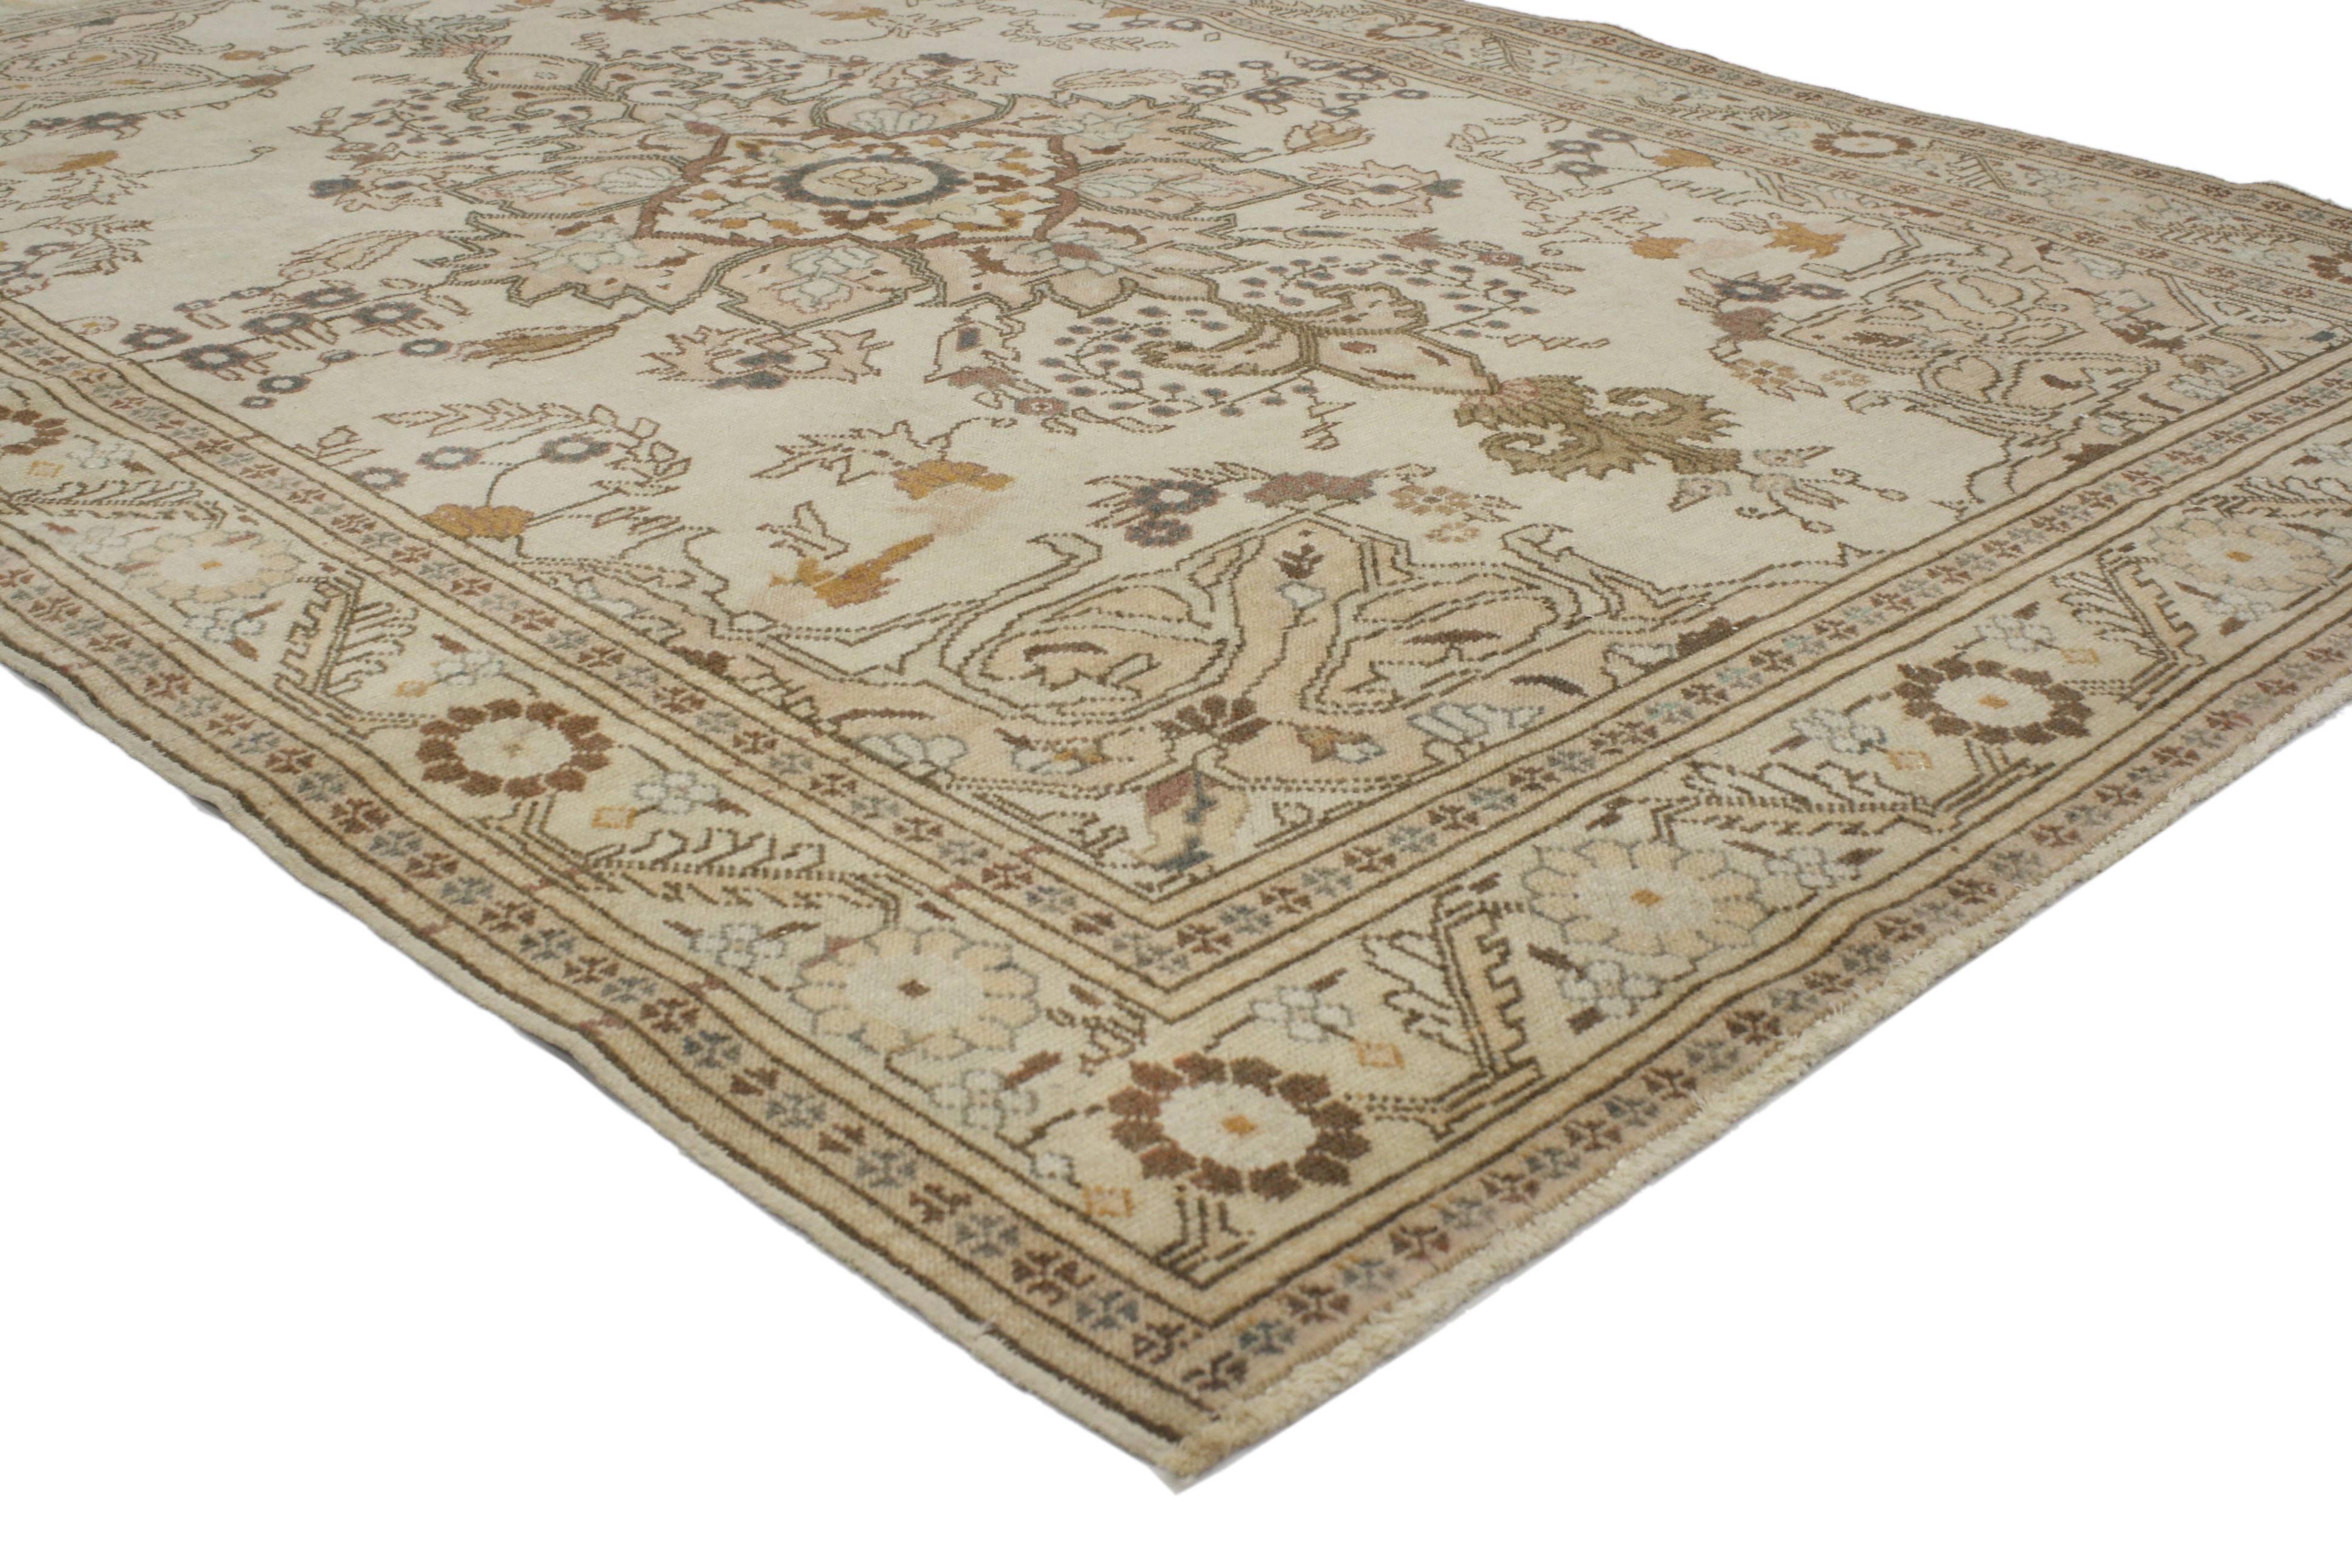 Providing an element of comfort, artistic statement and functional versatility, this vintage Turkish Sivas rug creates a soothing elegance and quiet sophistication. With its transitional style in light colors, this vintage Turkish rug features a